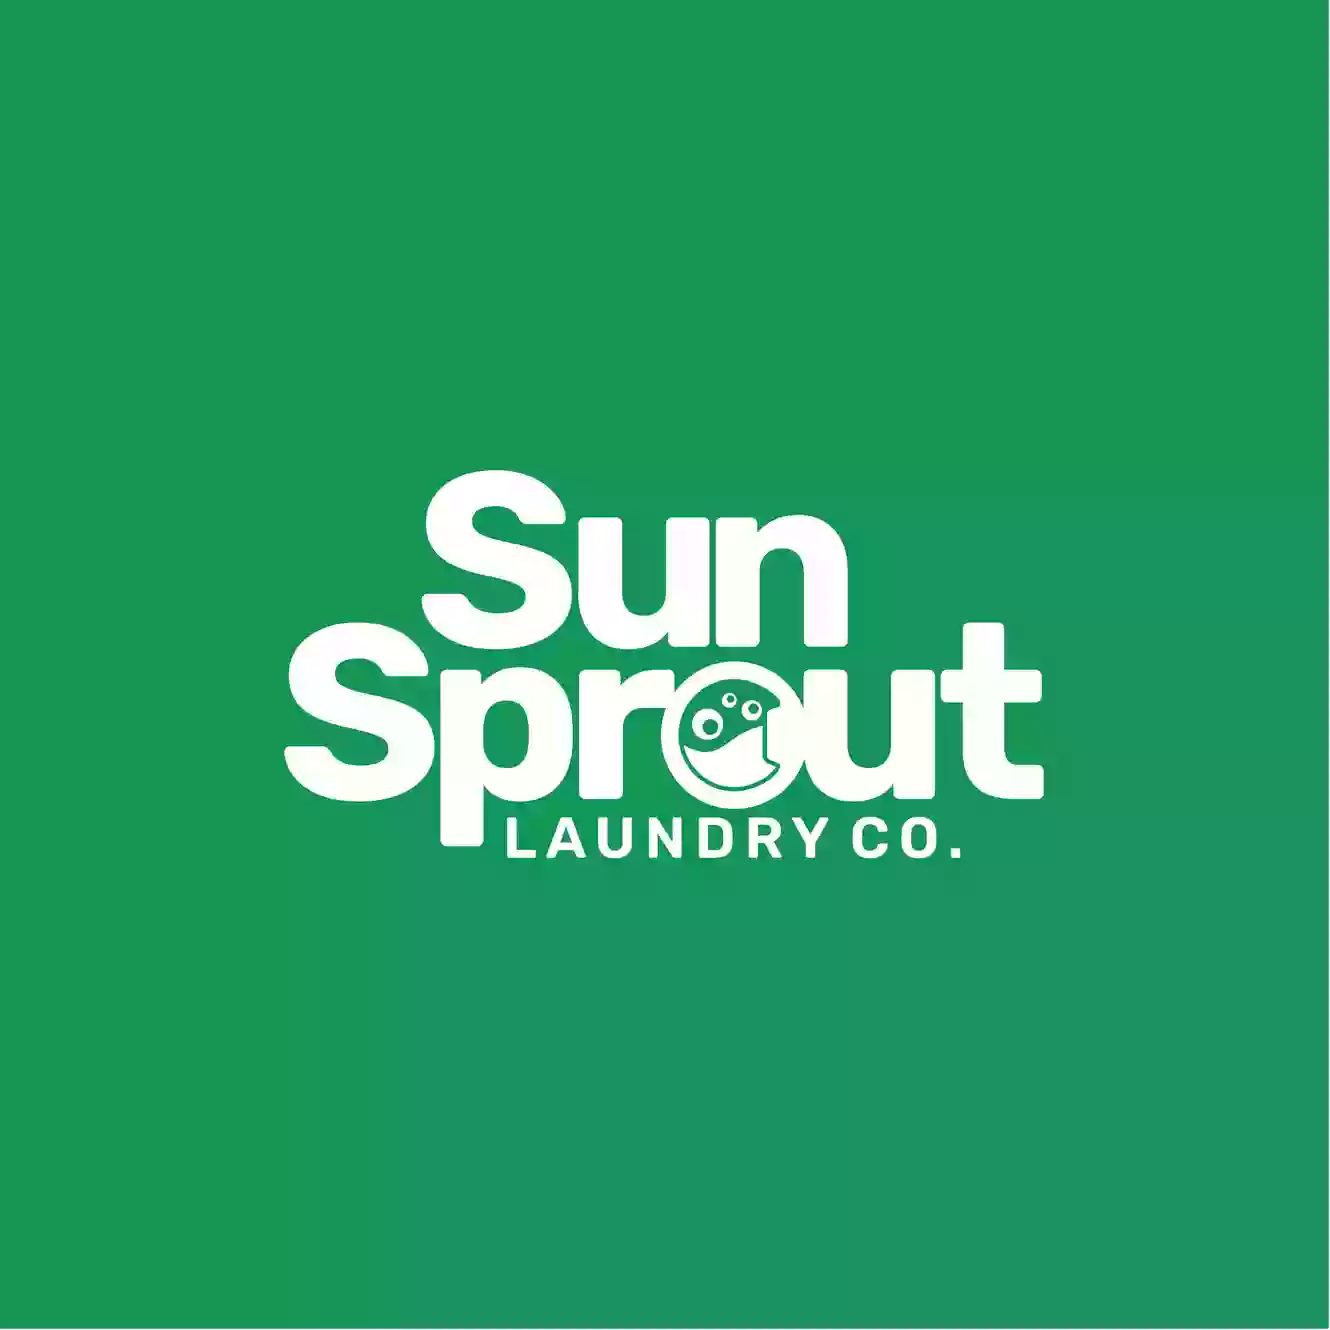 Sun Sprout Laundry Company